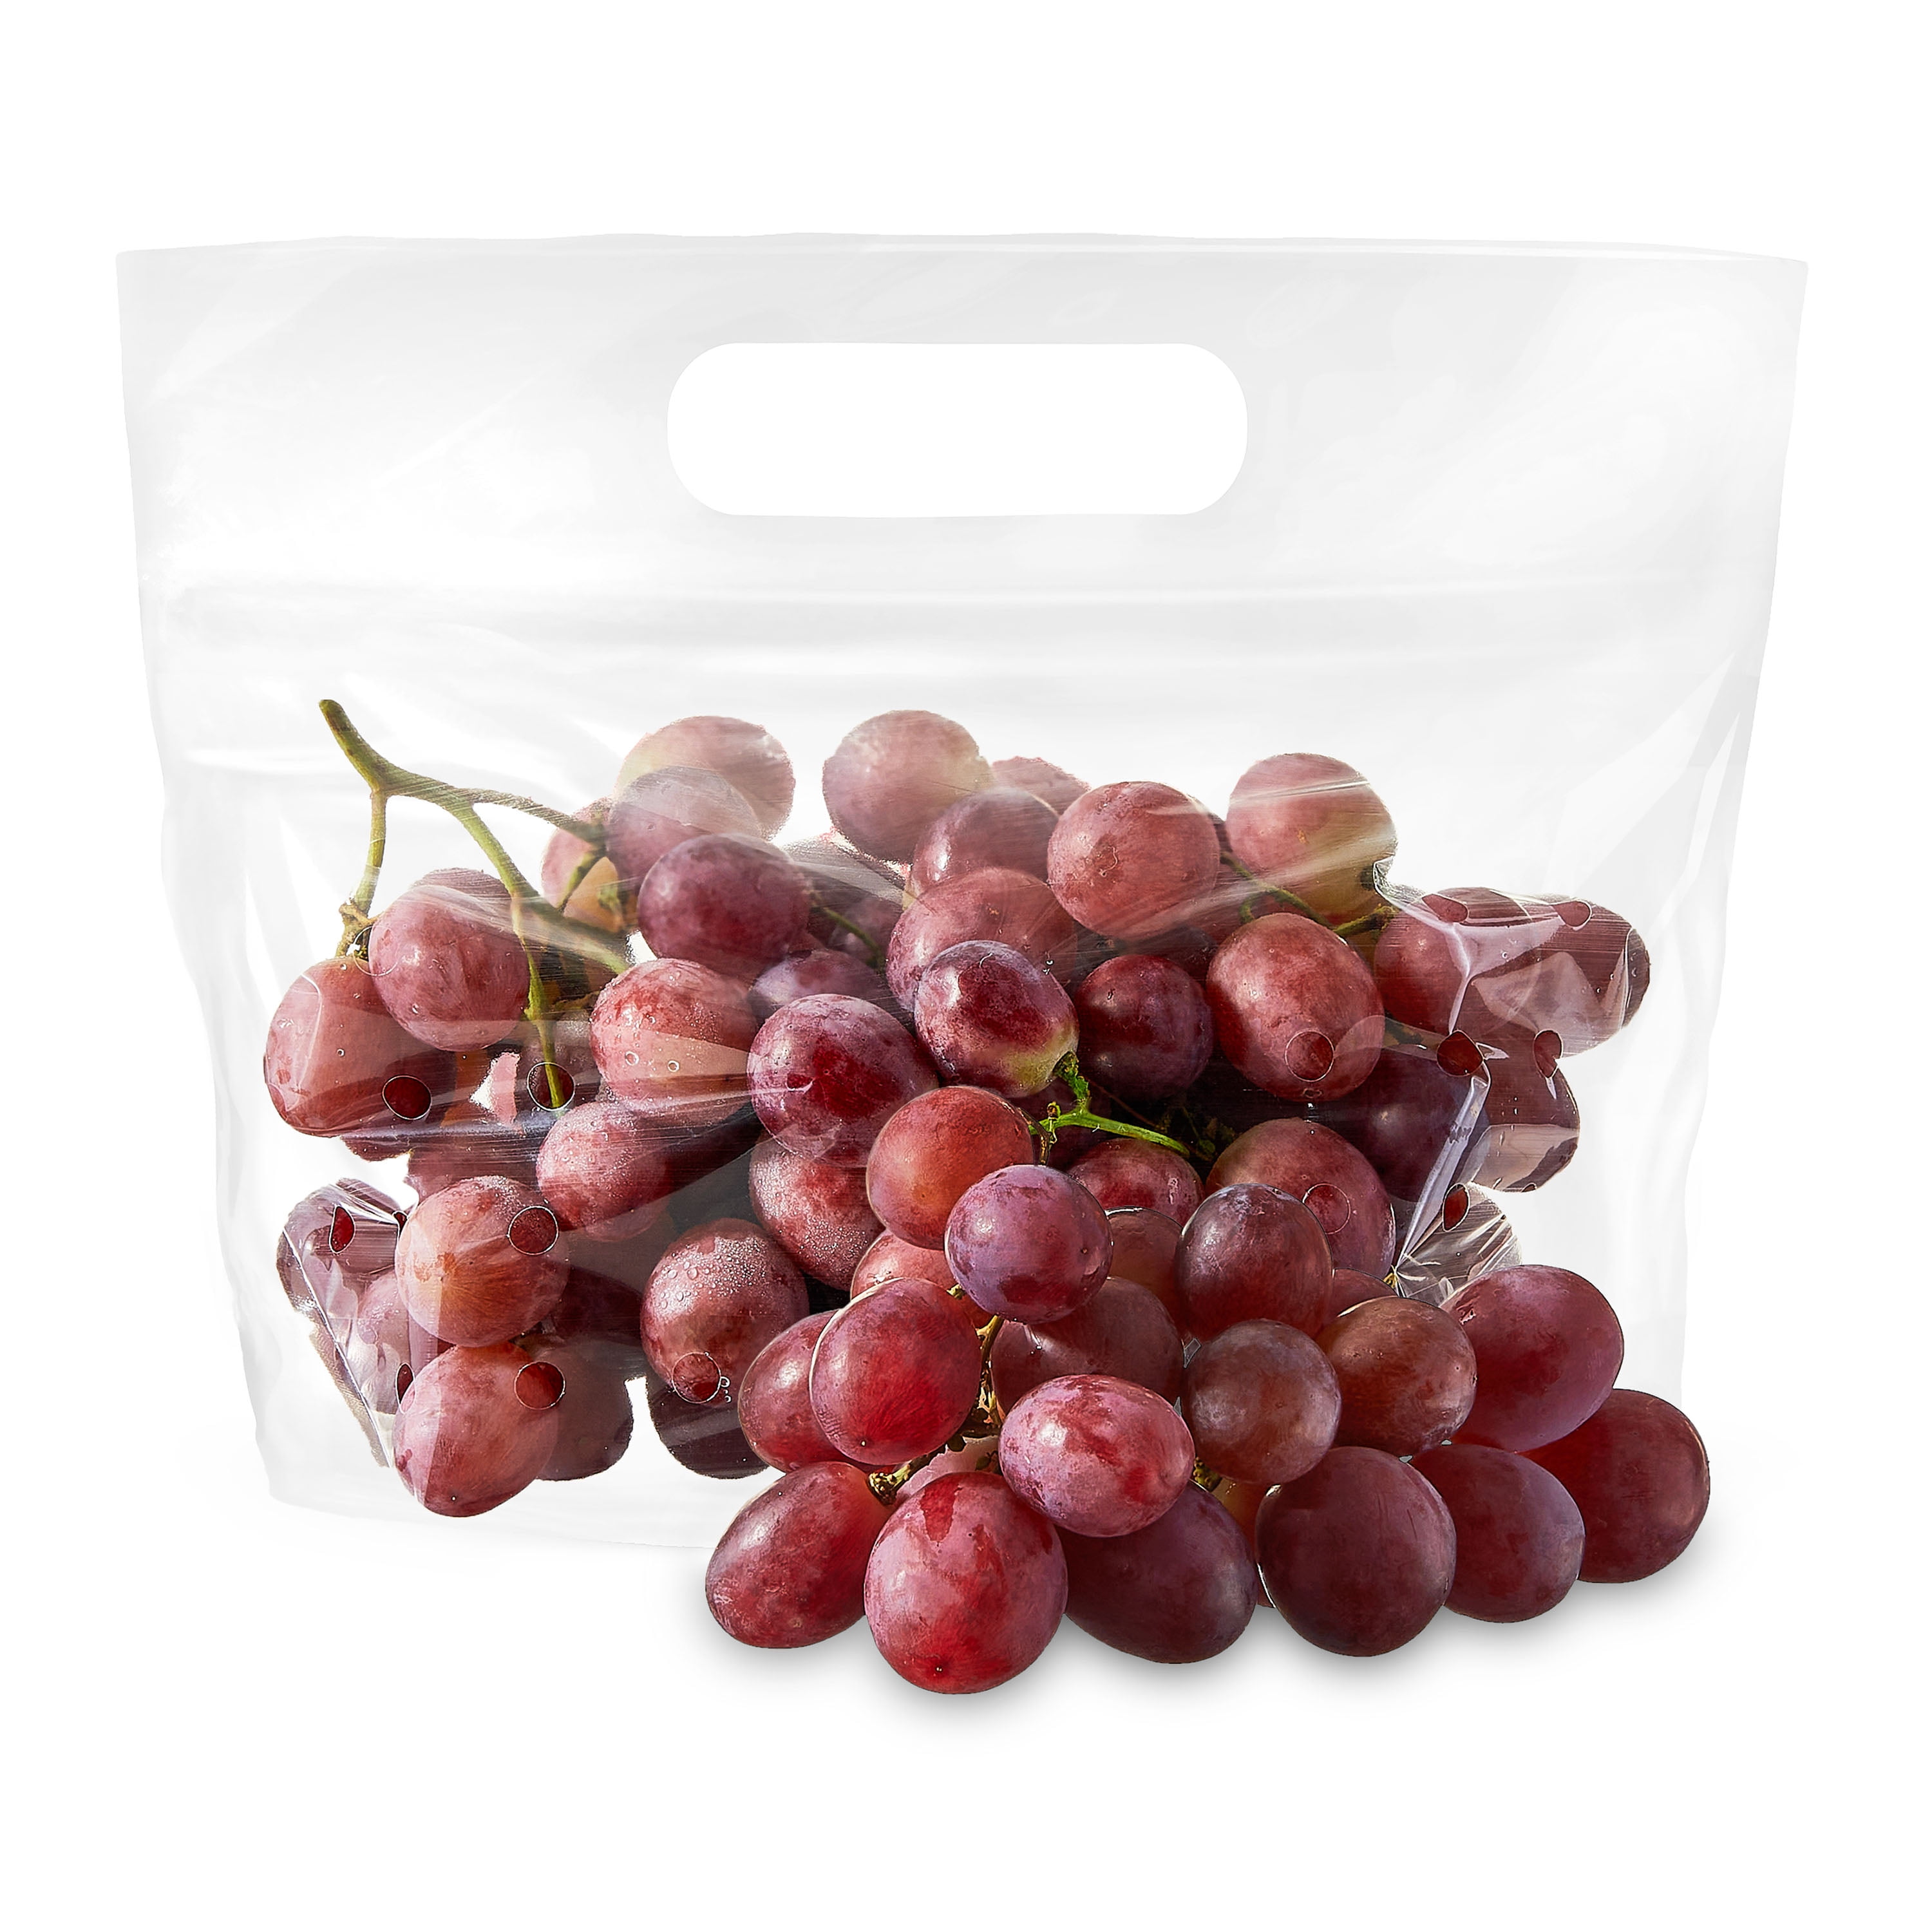 The Grape Debate: Shoppers divided over whether you need to buy the full bag  | Kidspot